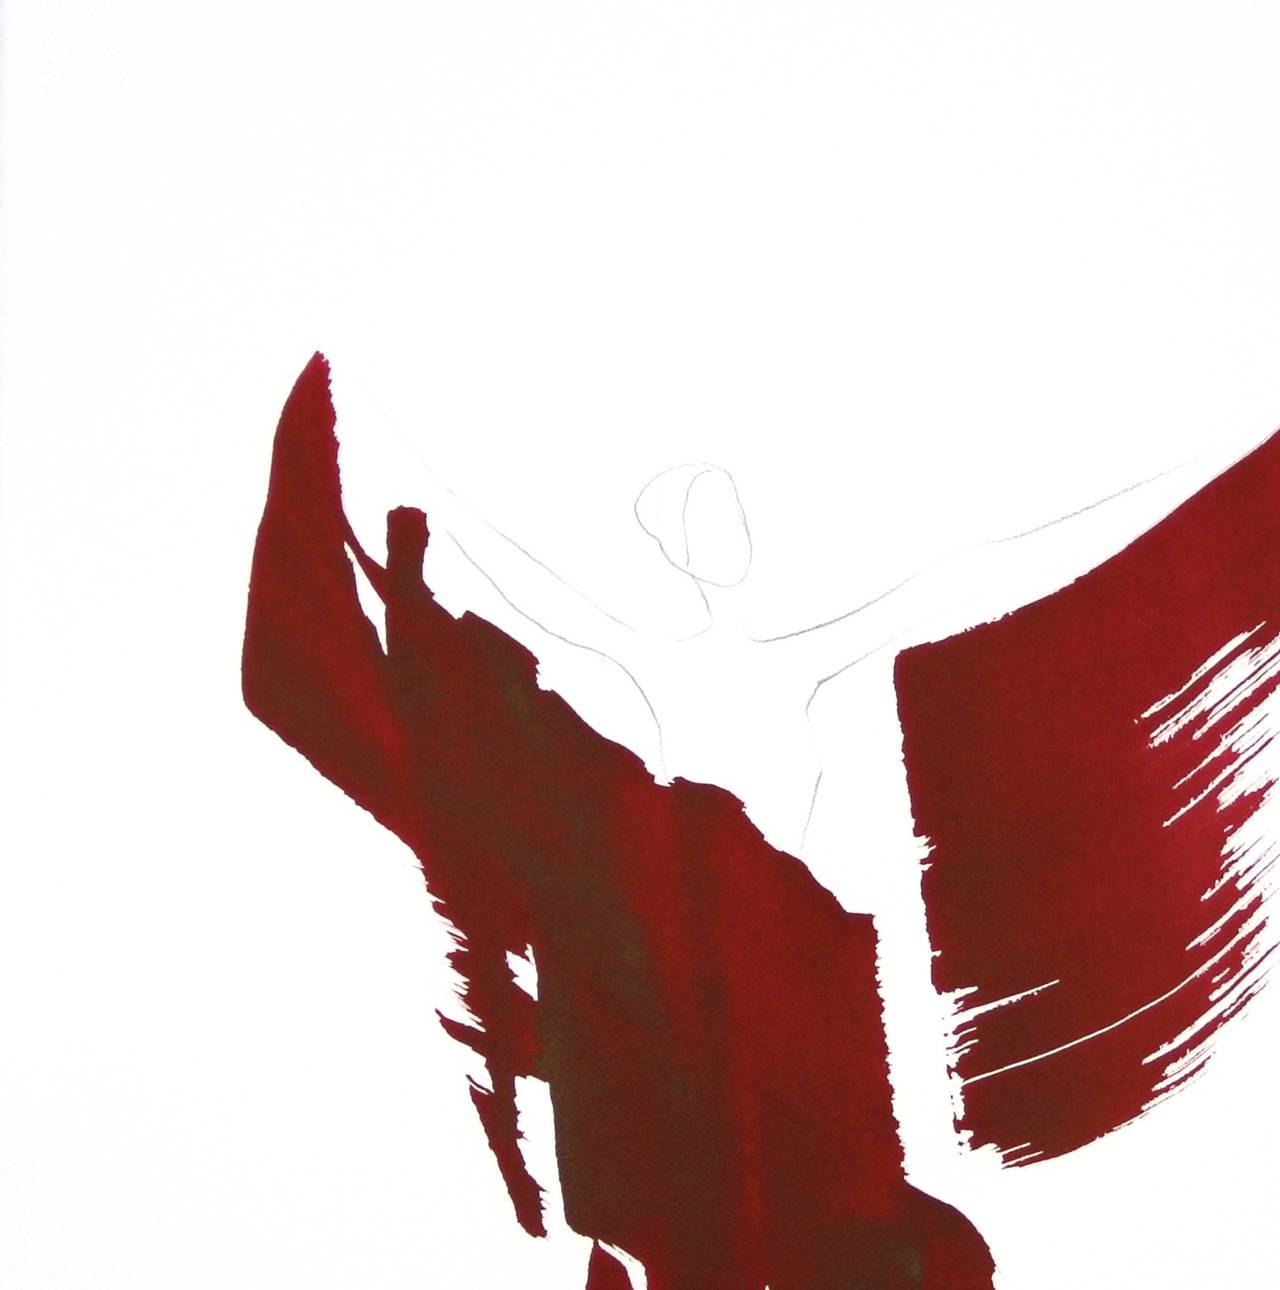 The Red Cloth 47 - Painting by Bettina Mauel